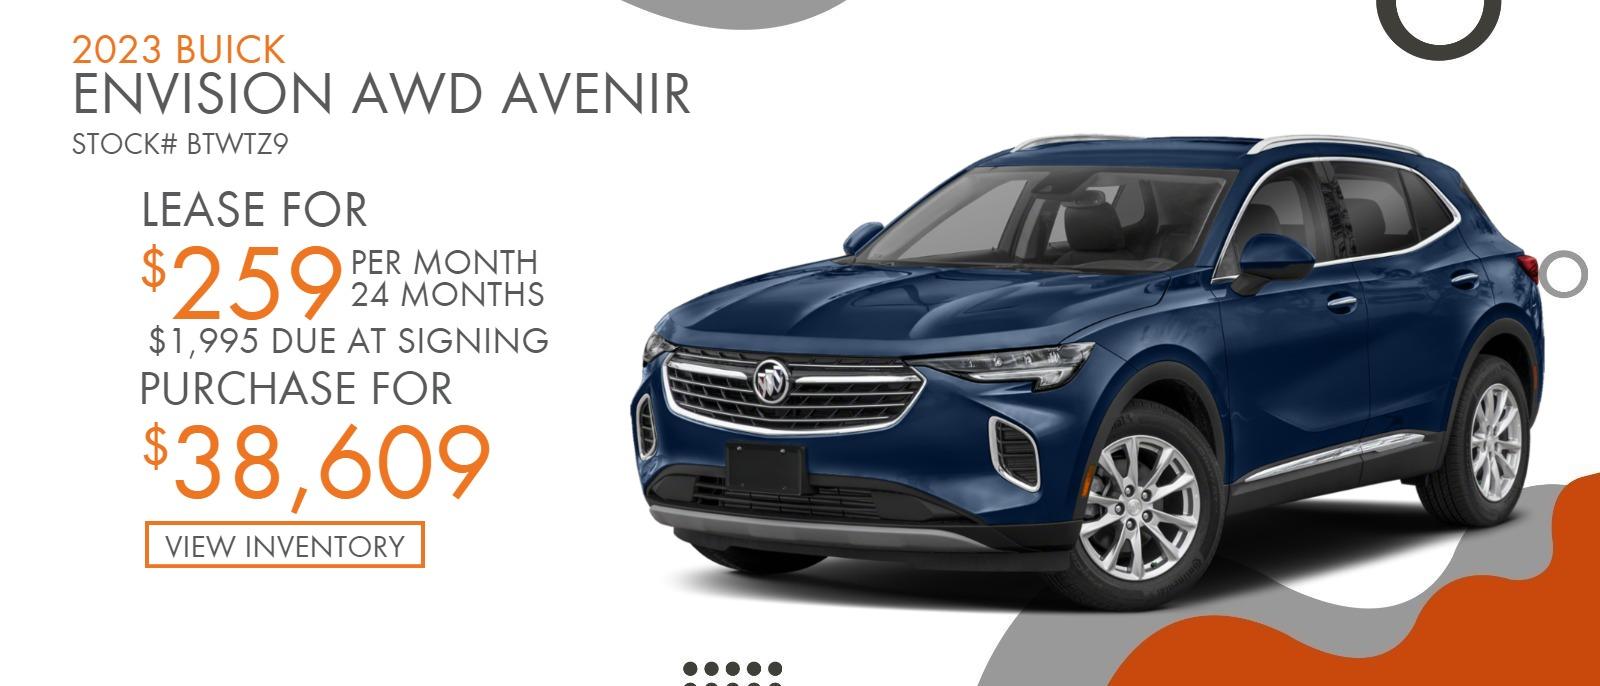 2023 Envision Avenir AWD
Stock# BTWTZ9
Lease for $259 per month, 24 months, $1995 down
Purchase for $38,609